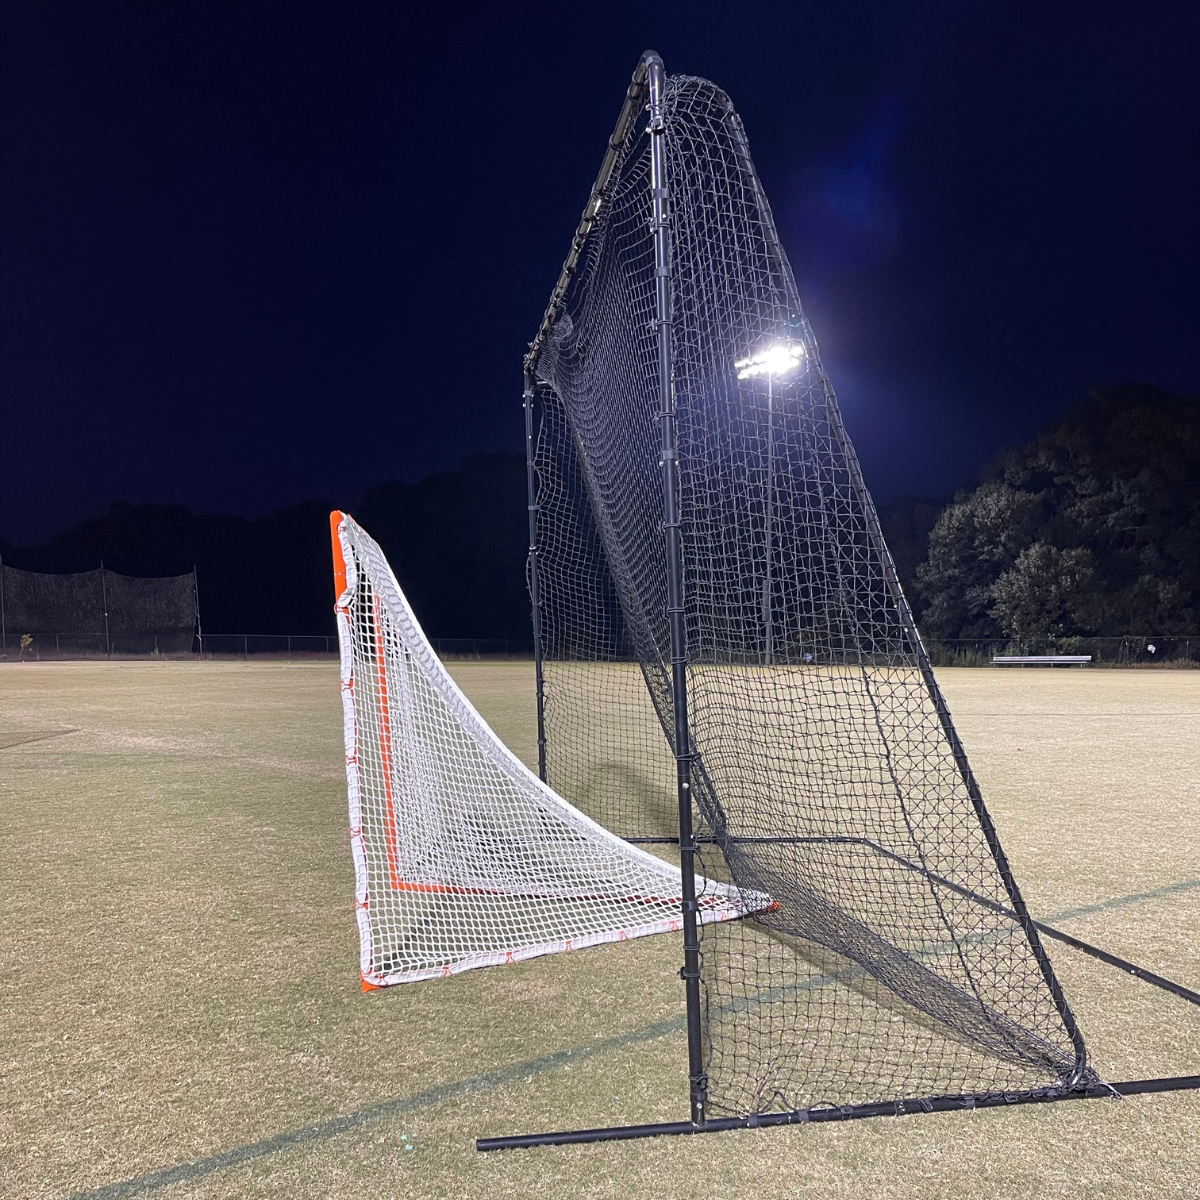 CrankCage Backstop - 14' x 10' x 7' by Crankshooter® - FREE SHIPPING